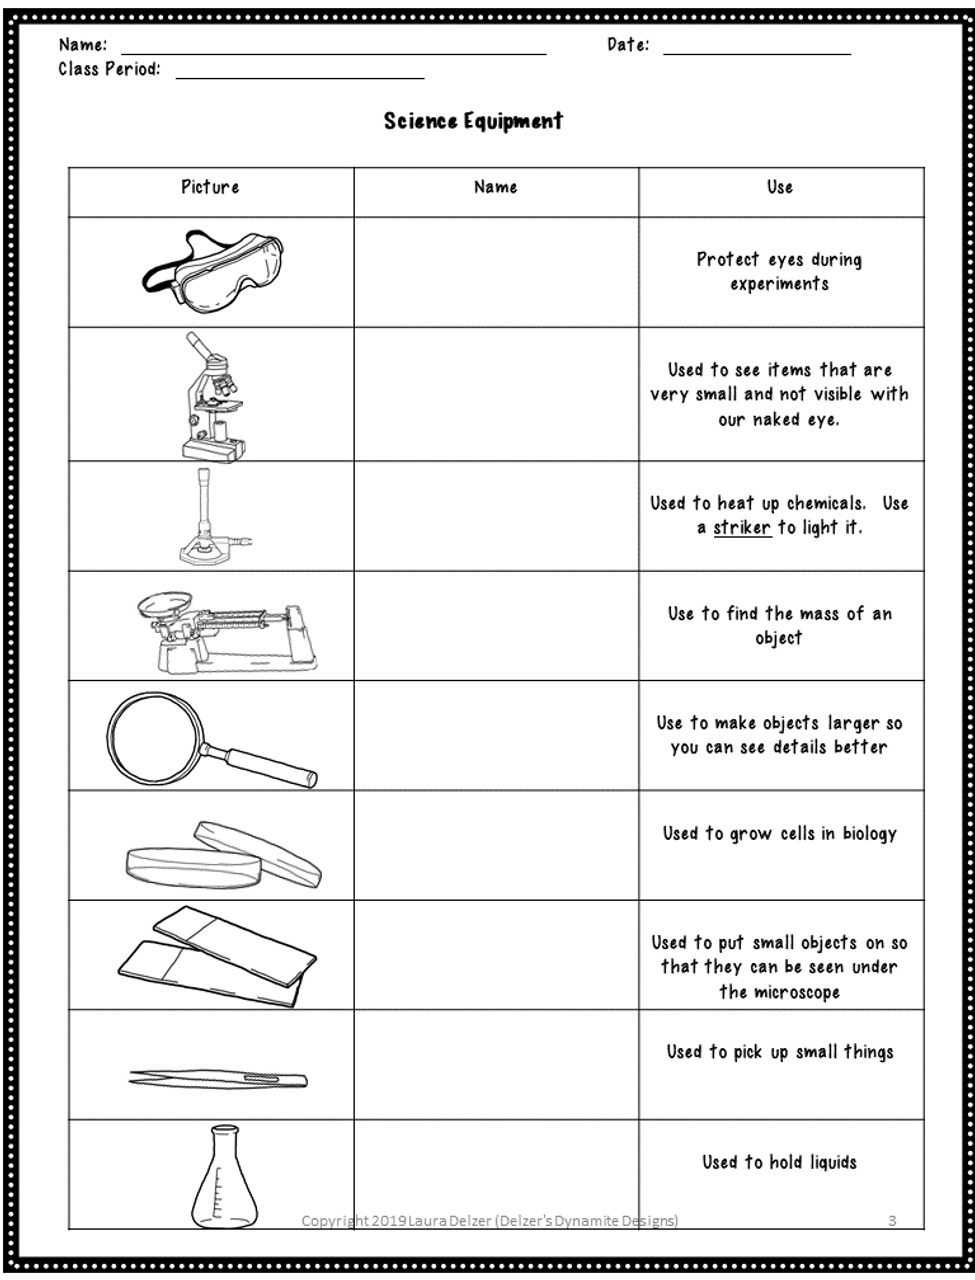 Lab Equipment Identification Worksheets. 36 items! - Amped Up Learning